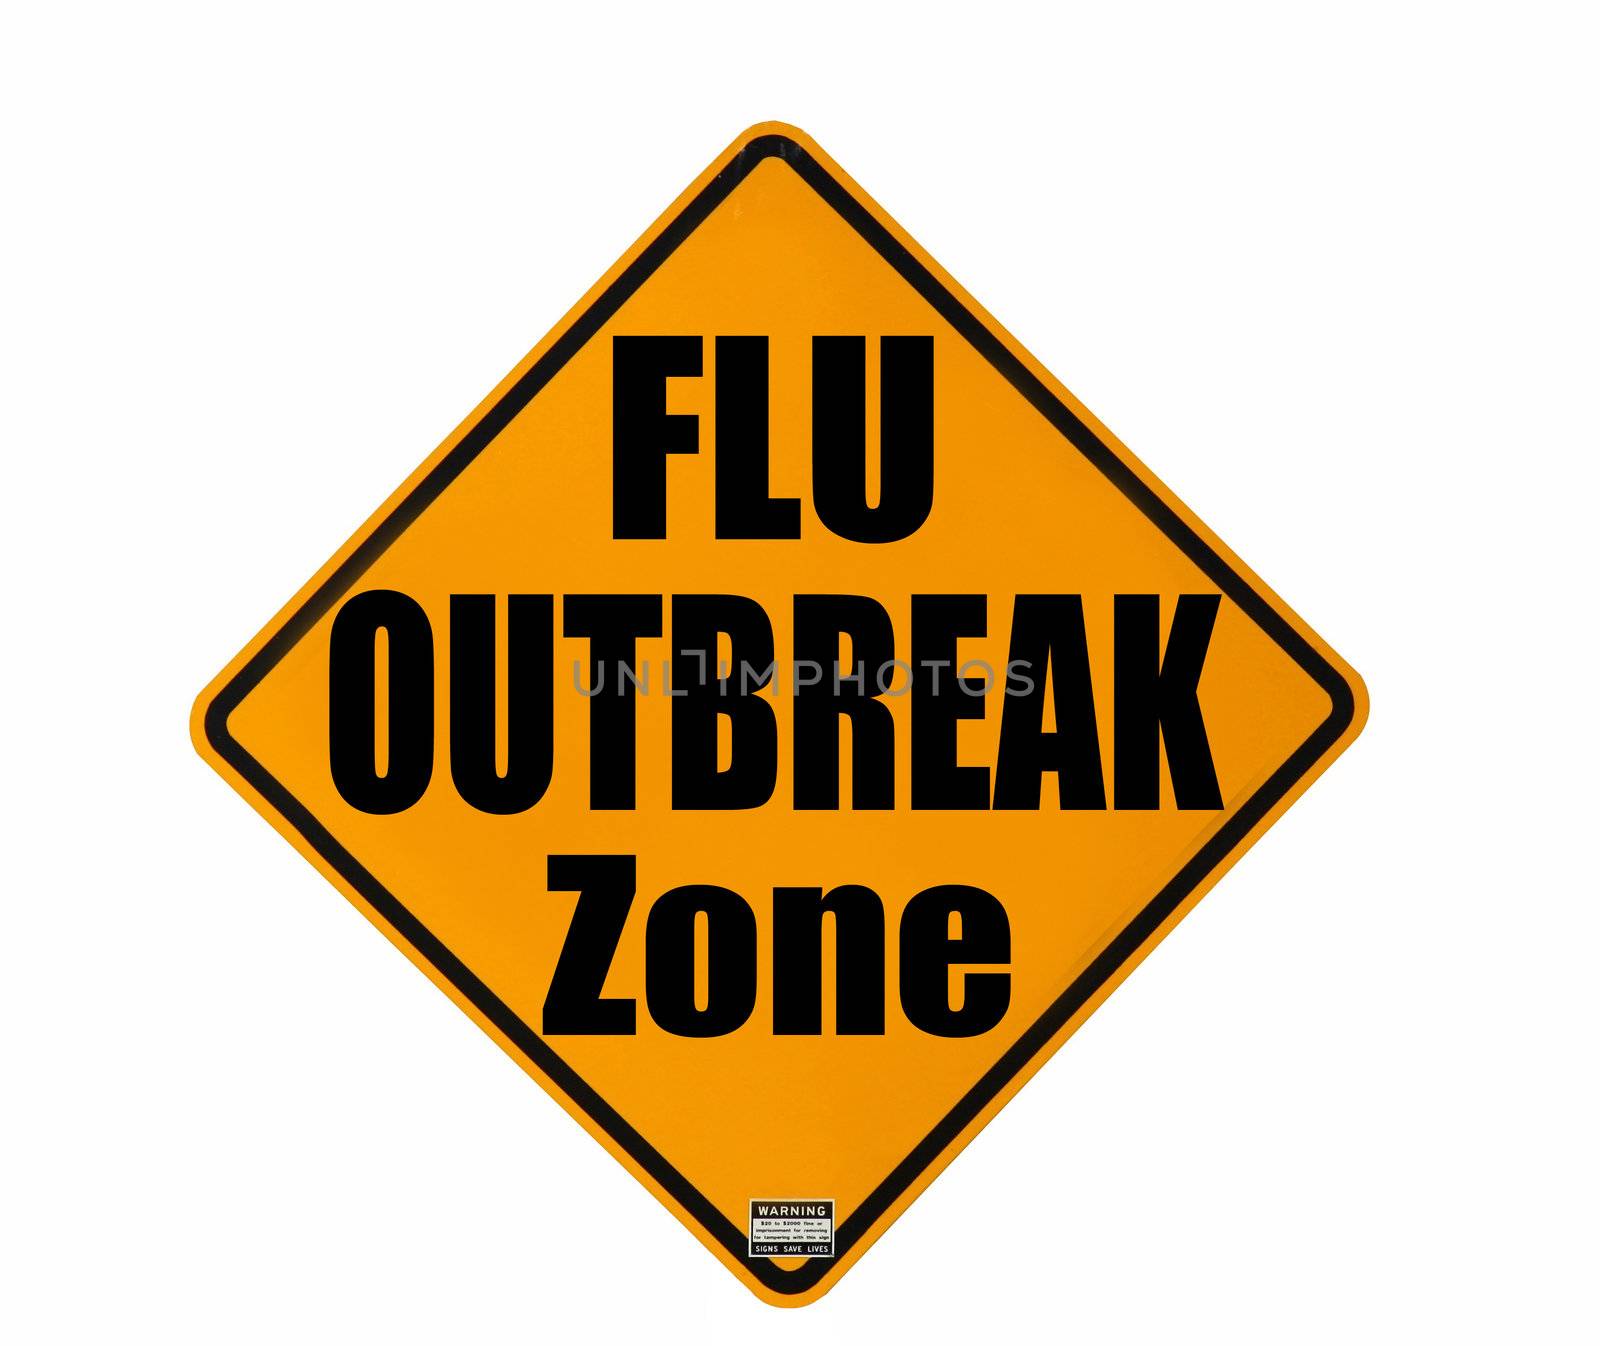 Flu outbreak warning by dcwcreations